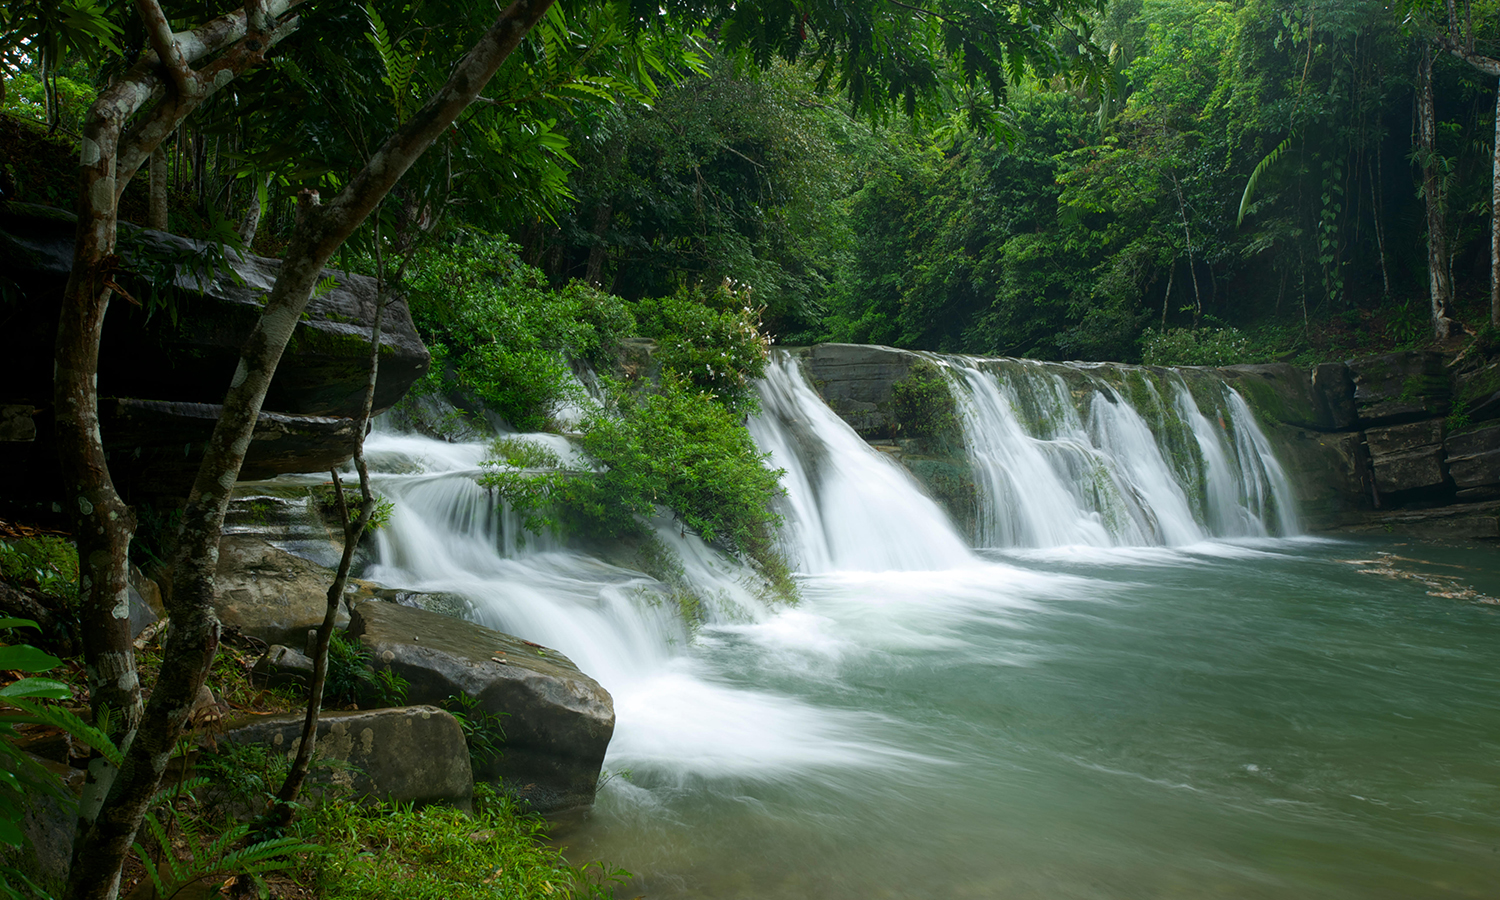 Land for sale in Belize — Waterfalls are a distinct feature of some lots located in Cayo and Stann Creek.